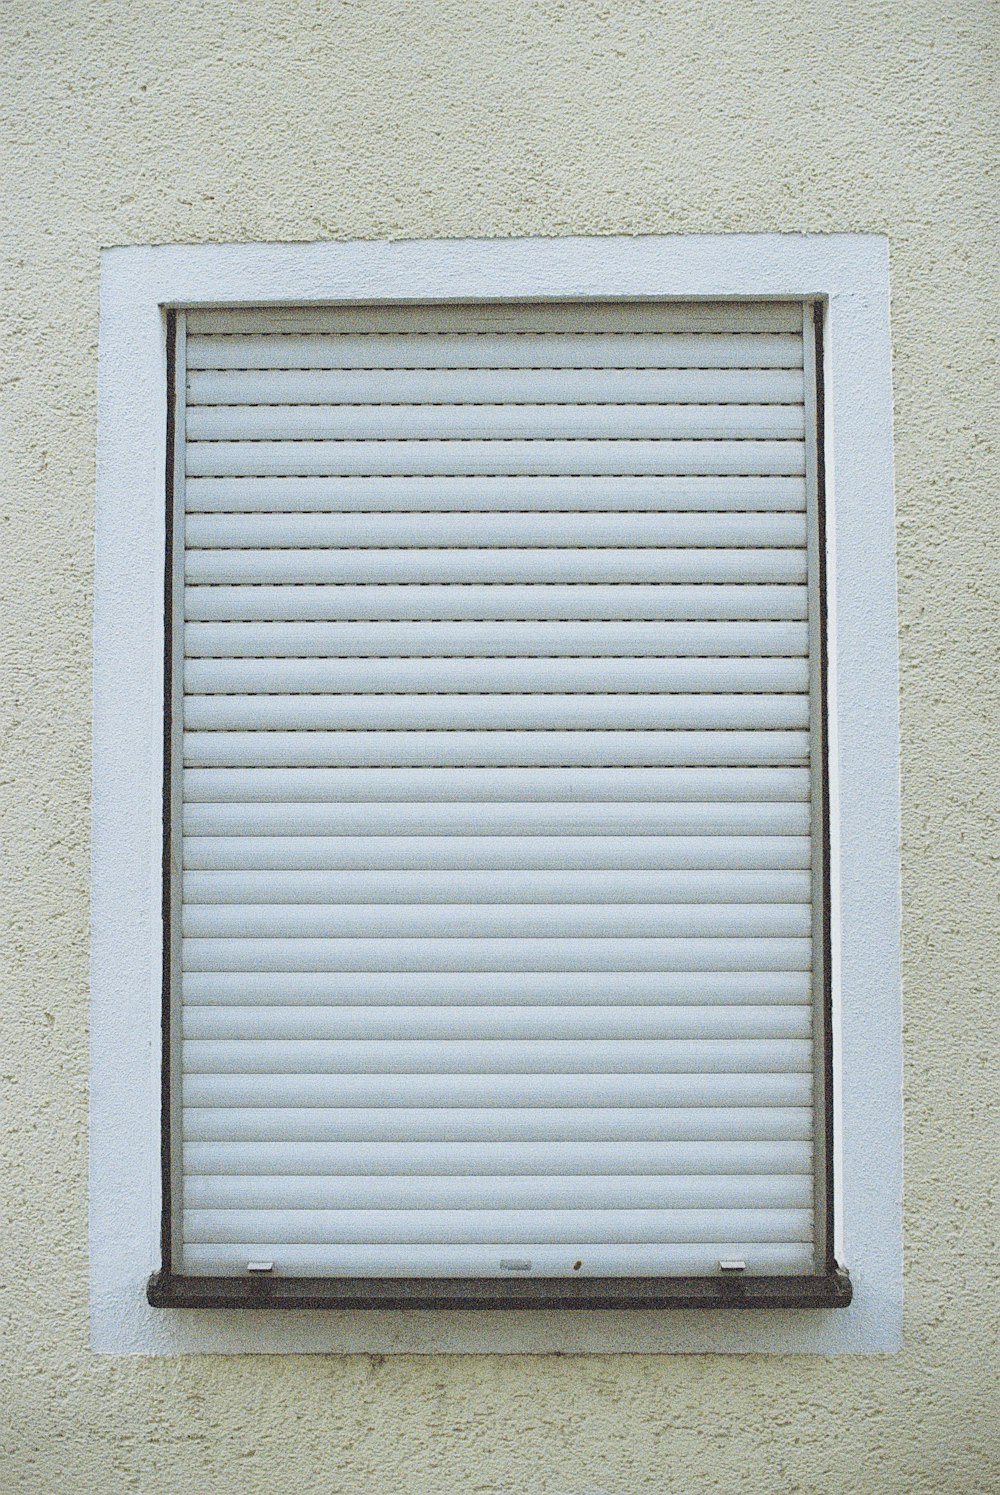 white window blinds on white concrete wall